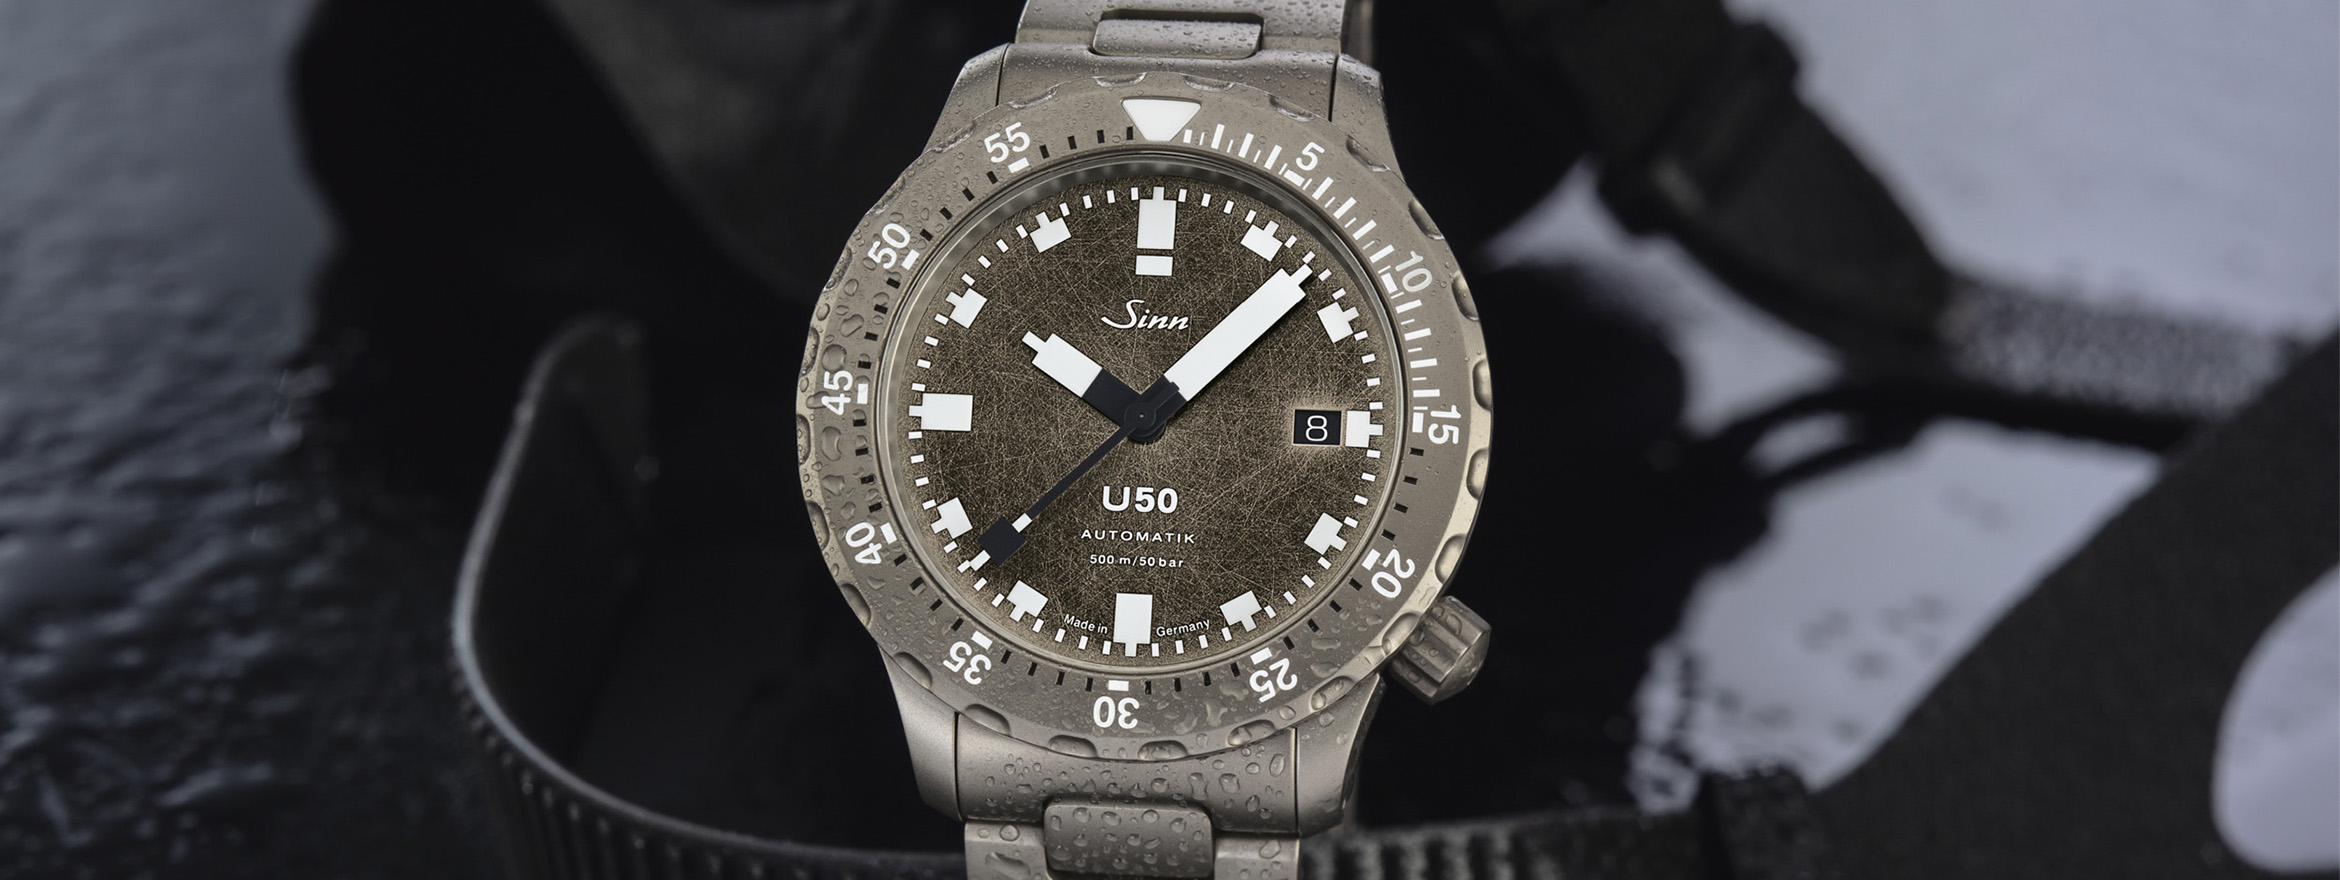 Sinn’s Latest Watches Have Function at the Fore